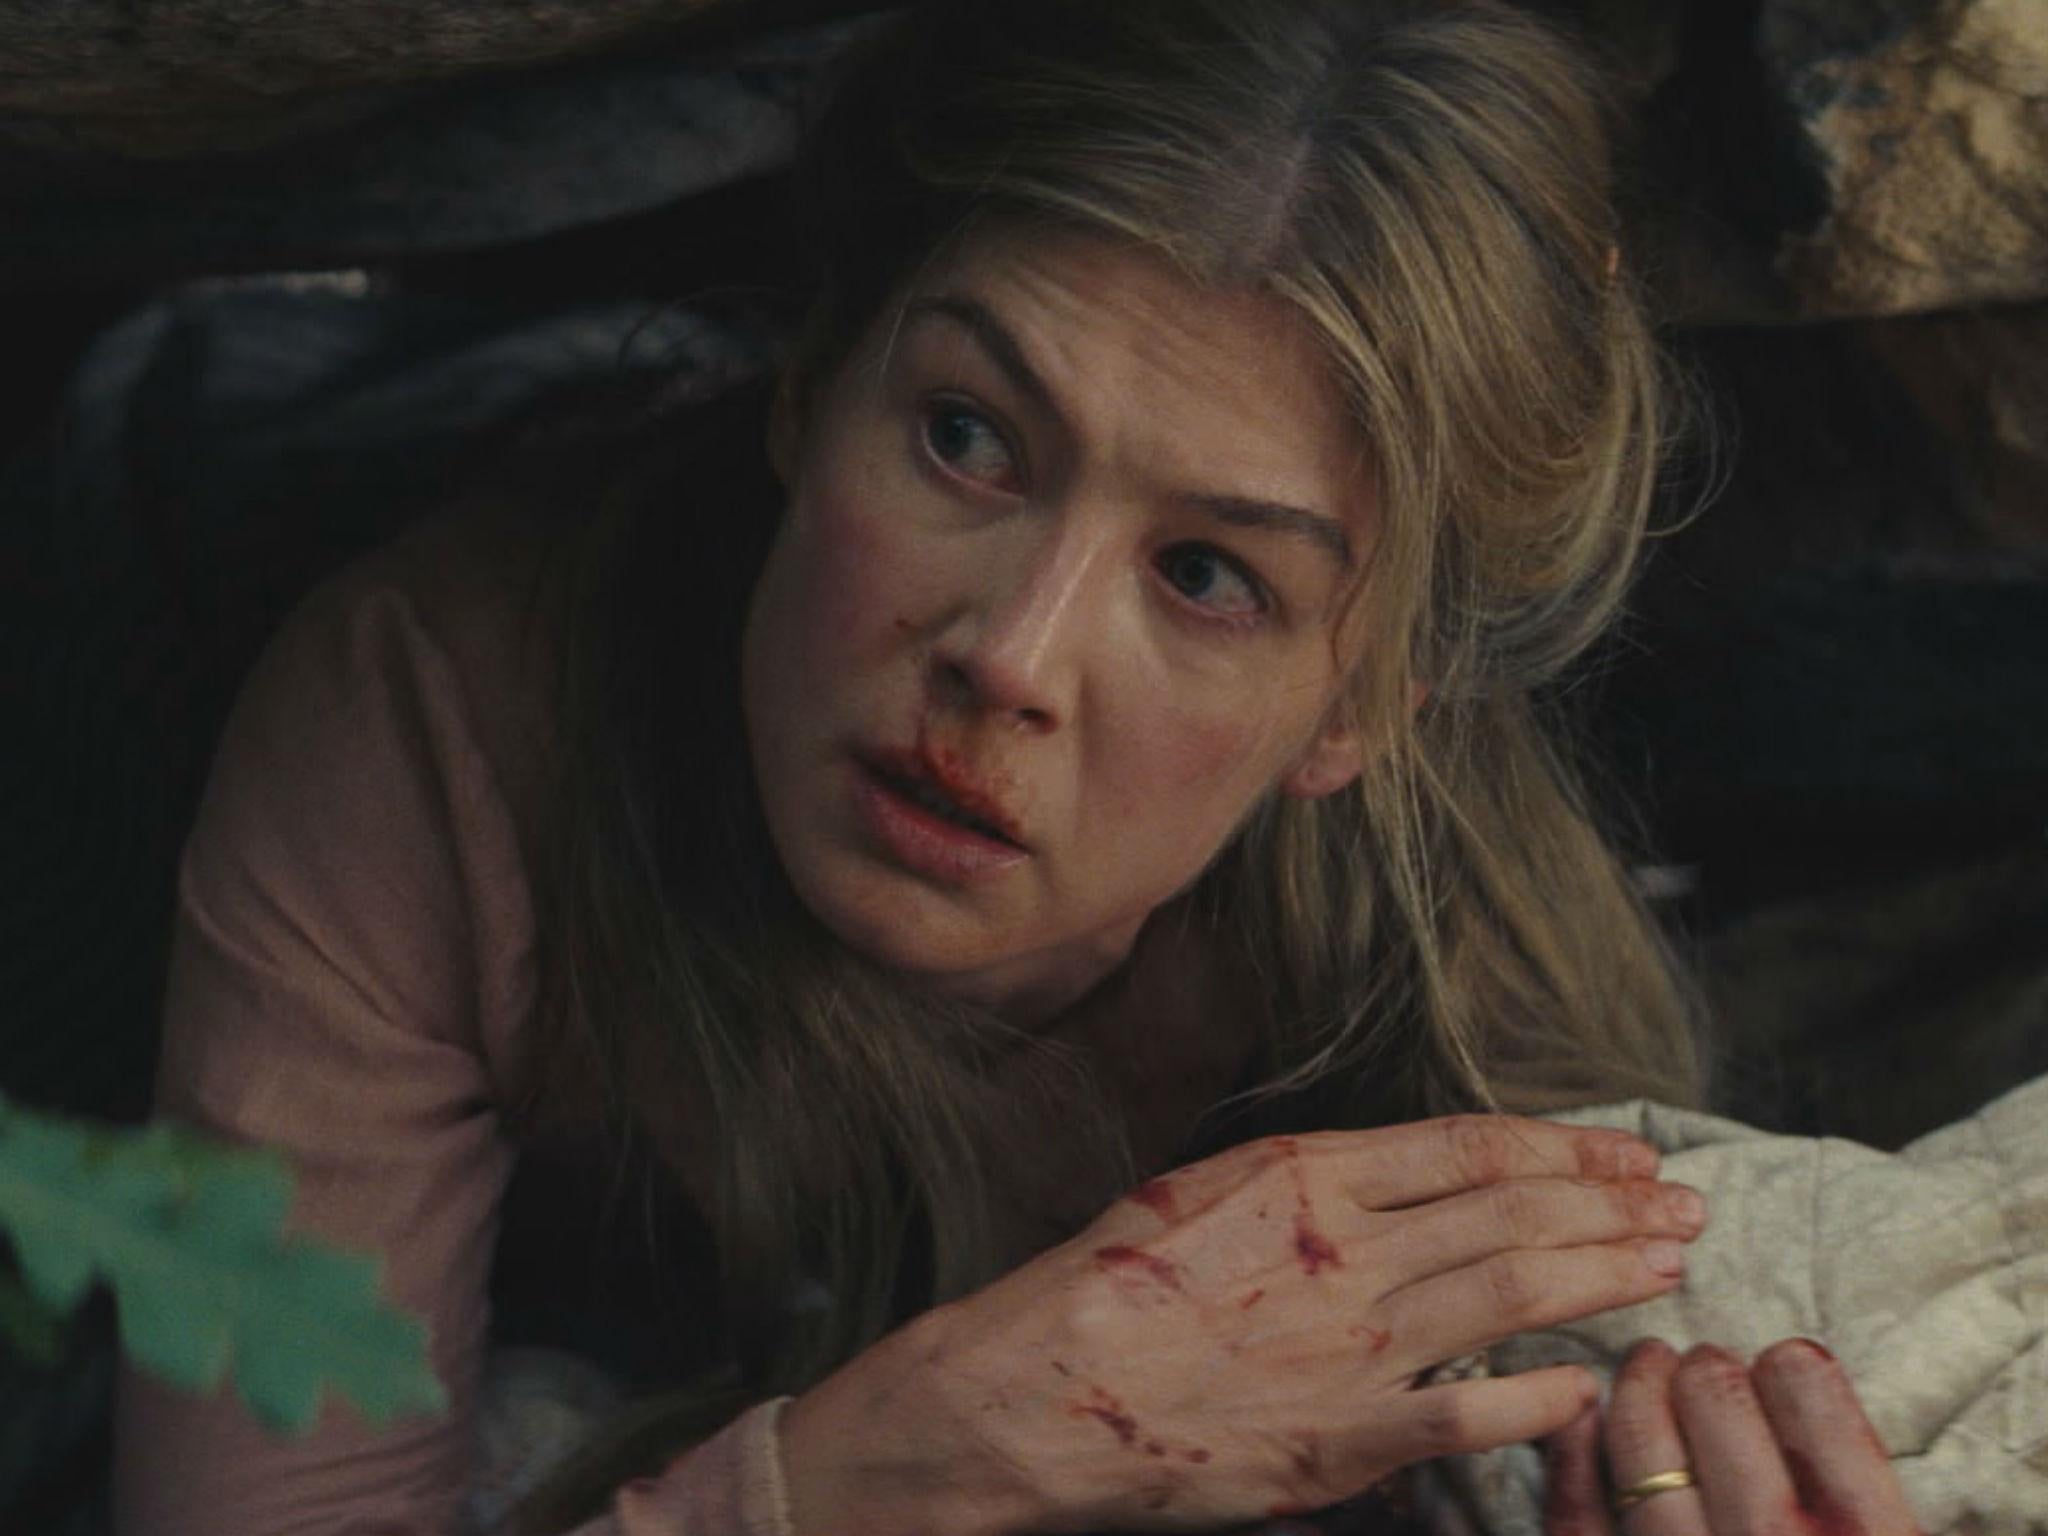 Rosamund Pike stars as a frontierswoman out west in Scott Cooper's introspective western 'Hostiles'